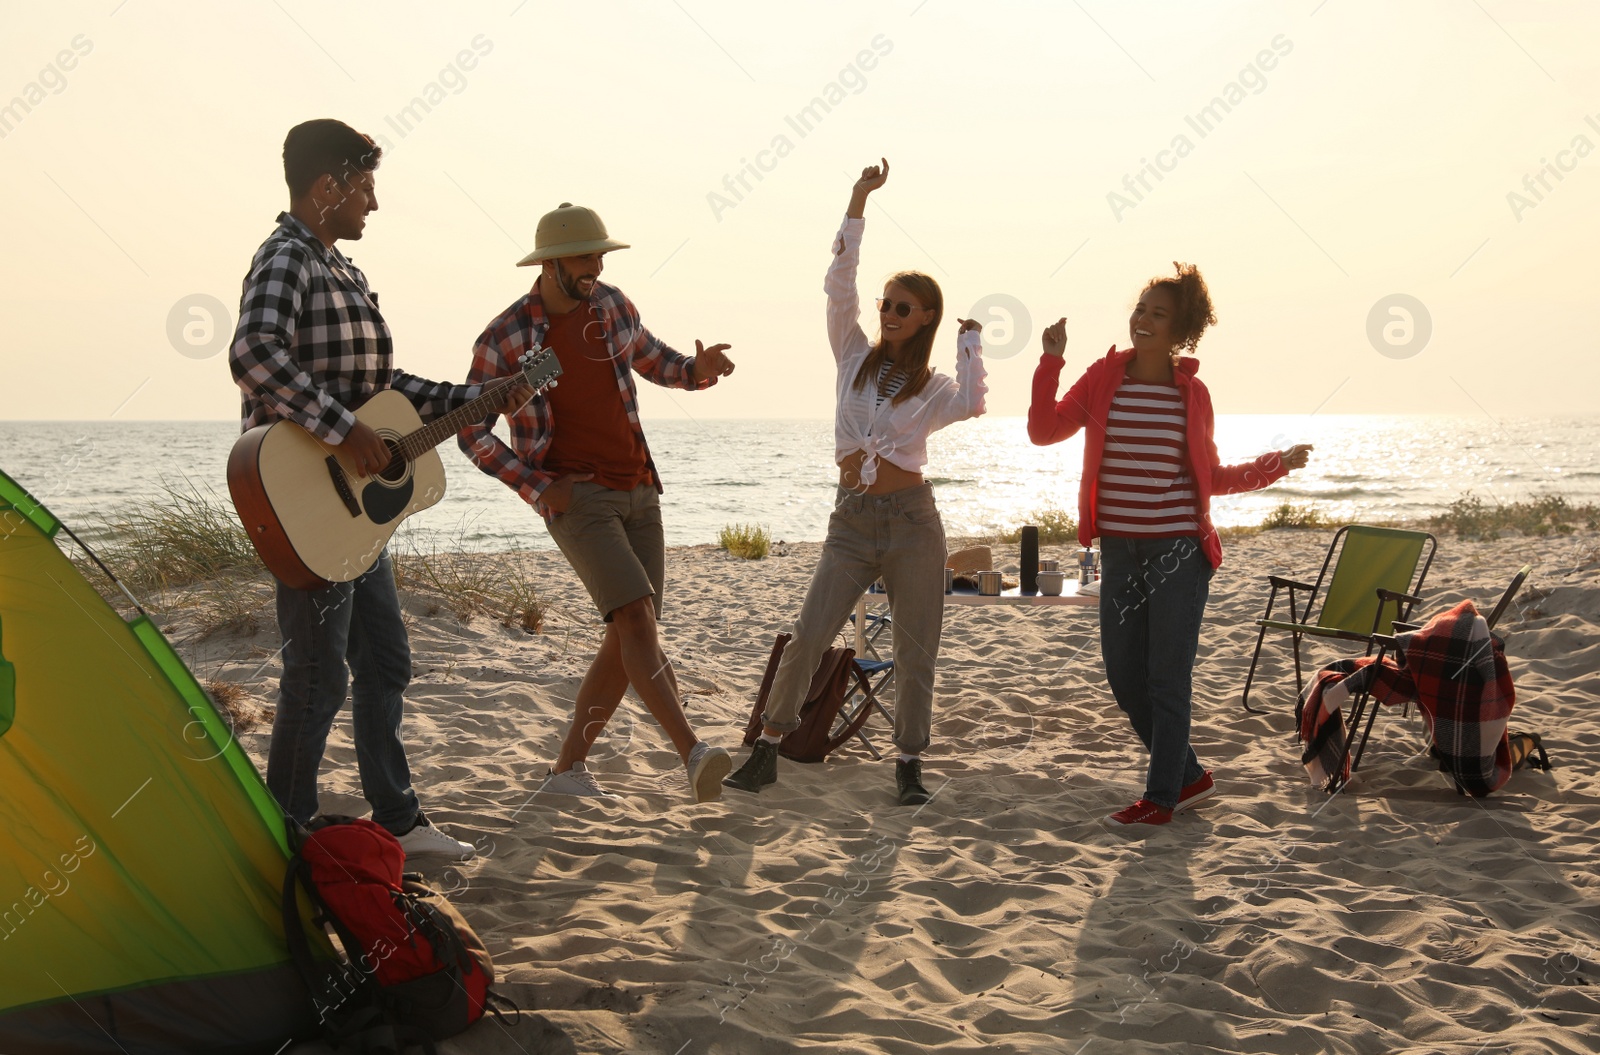 Photo of Friends having party near camping tent on sandy beach